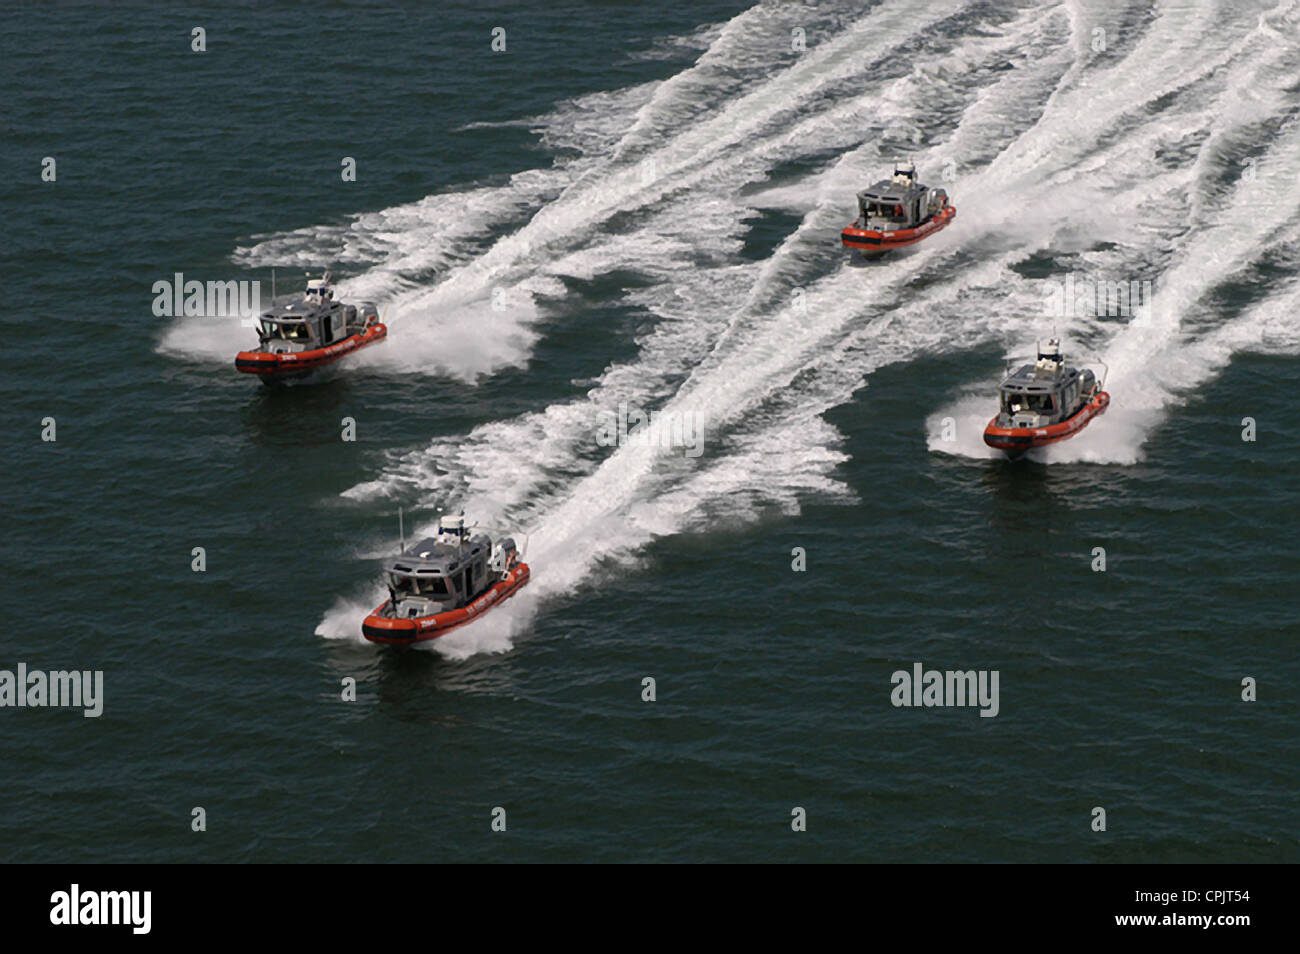 Coast Guard 25-foot rapid response boats from Station St. Petersburg practice close quarters boat-handling June 12, 2007 near Tampa Bay. Stock Photo